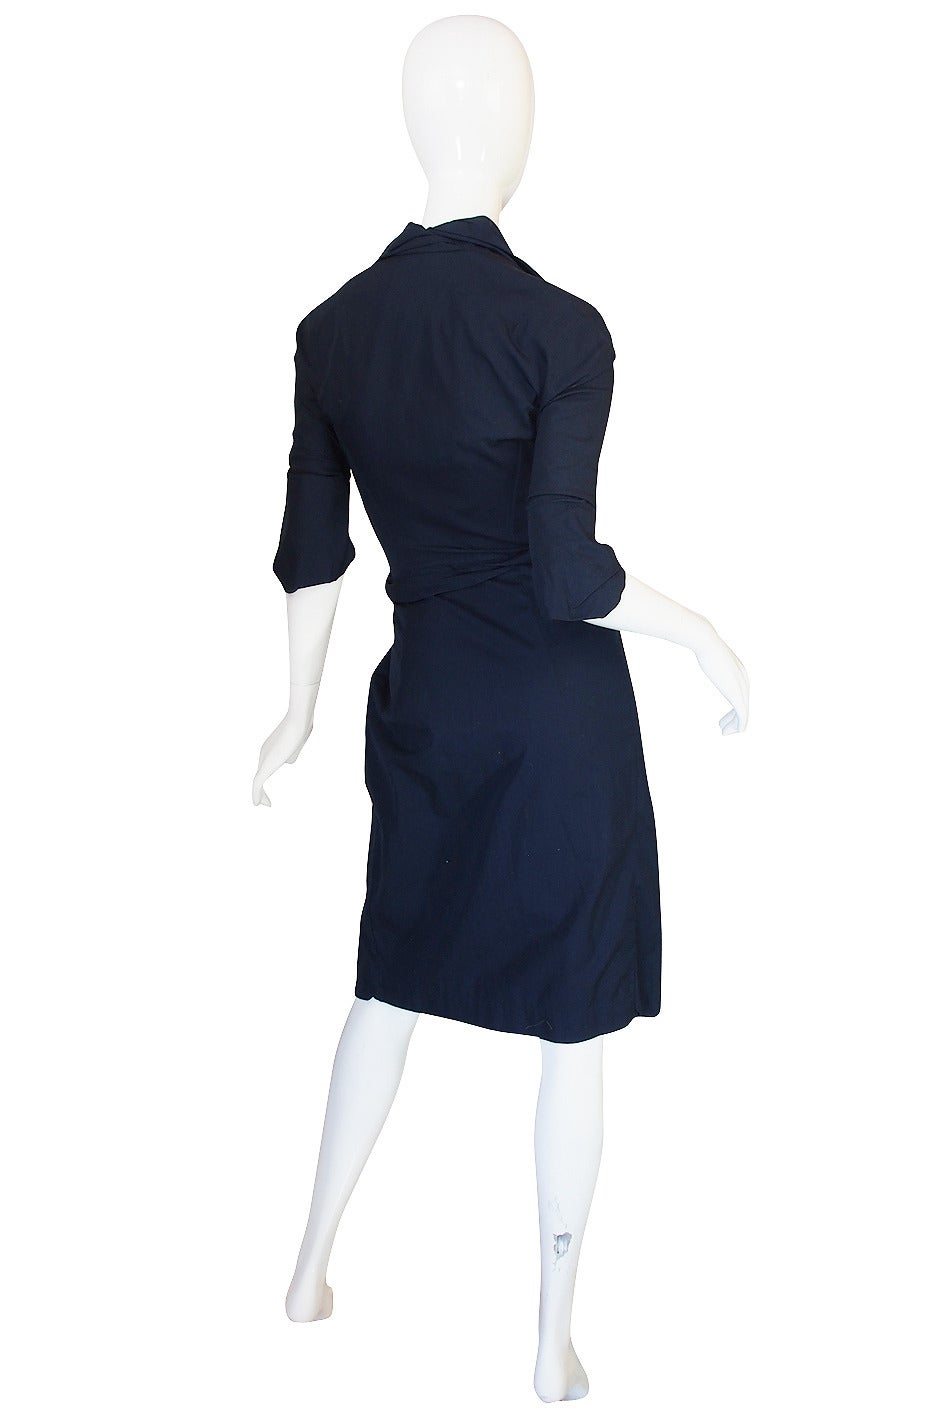 This lovely little blue cotton dress by Vivienne Westwood is just fantastic and will easily stand the test of time. I love the sexy hourglass silhouette it has and the detailing on it is fabulous. It is made from a 100% cotton mix that makes it